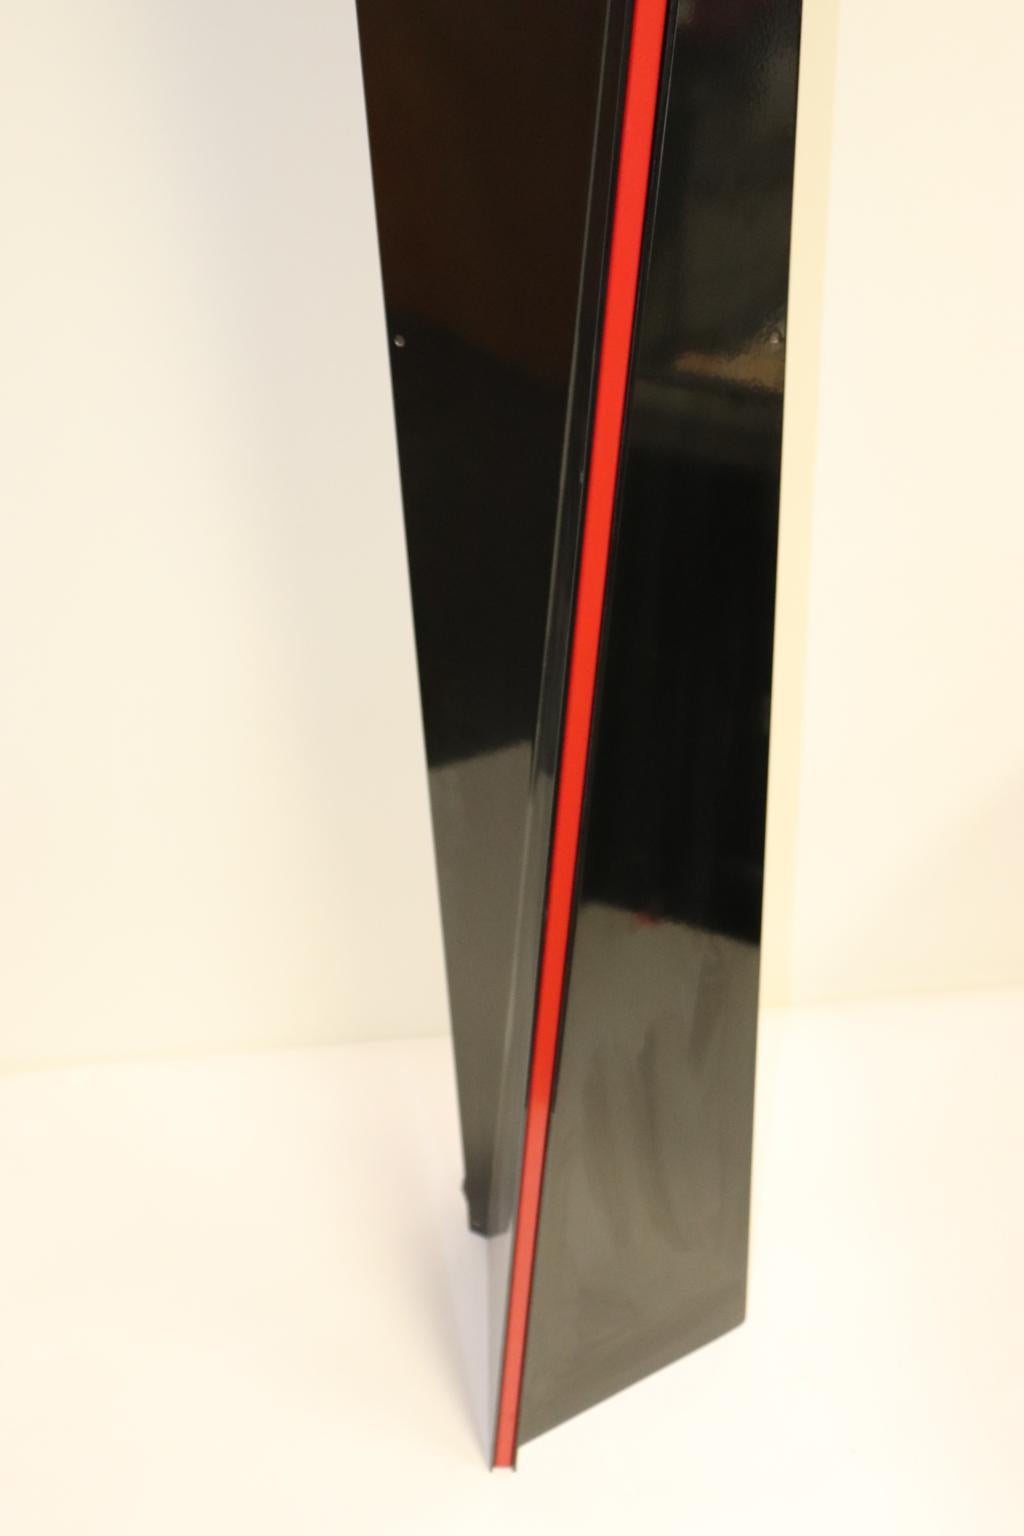 Italian Mauro Marzollo Sculptured Floor Lamp Black with Red Stripes Details For Sale